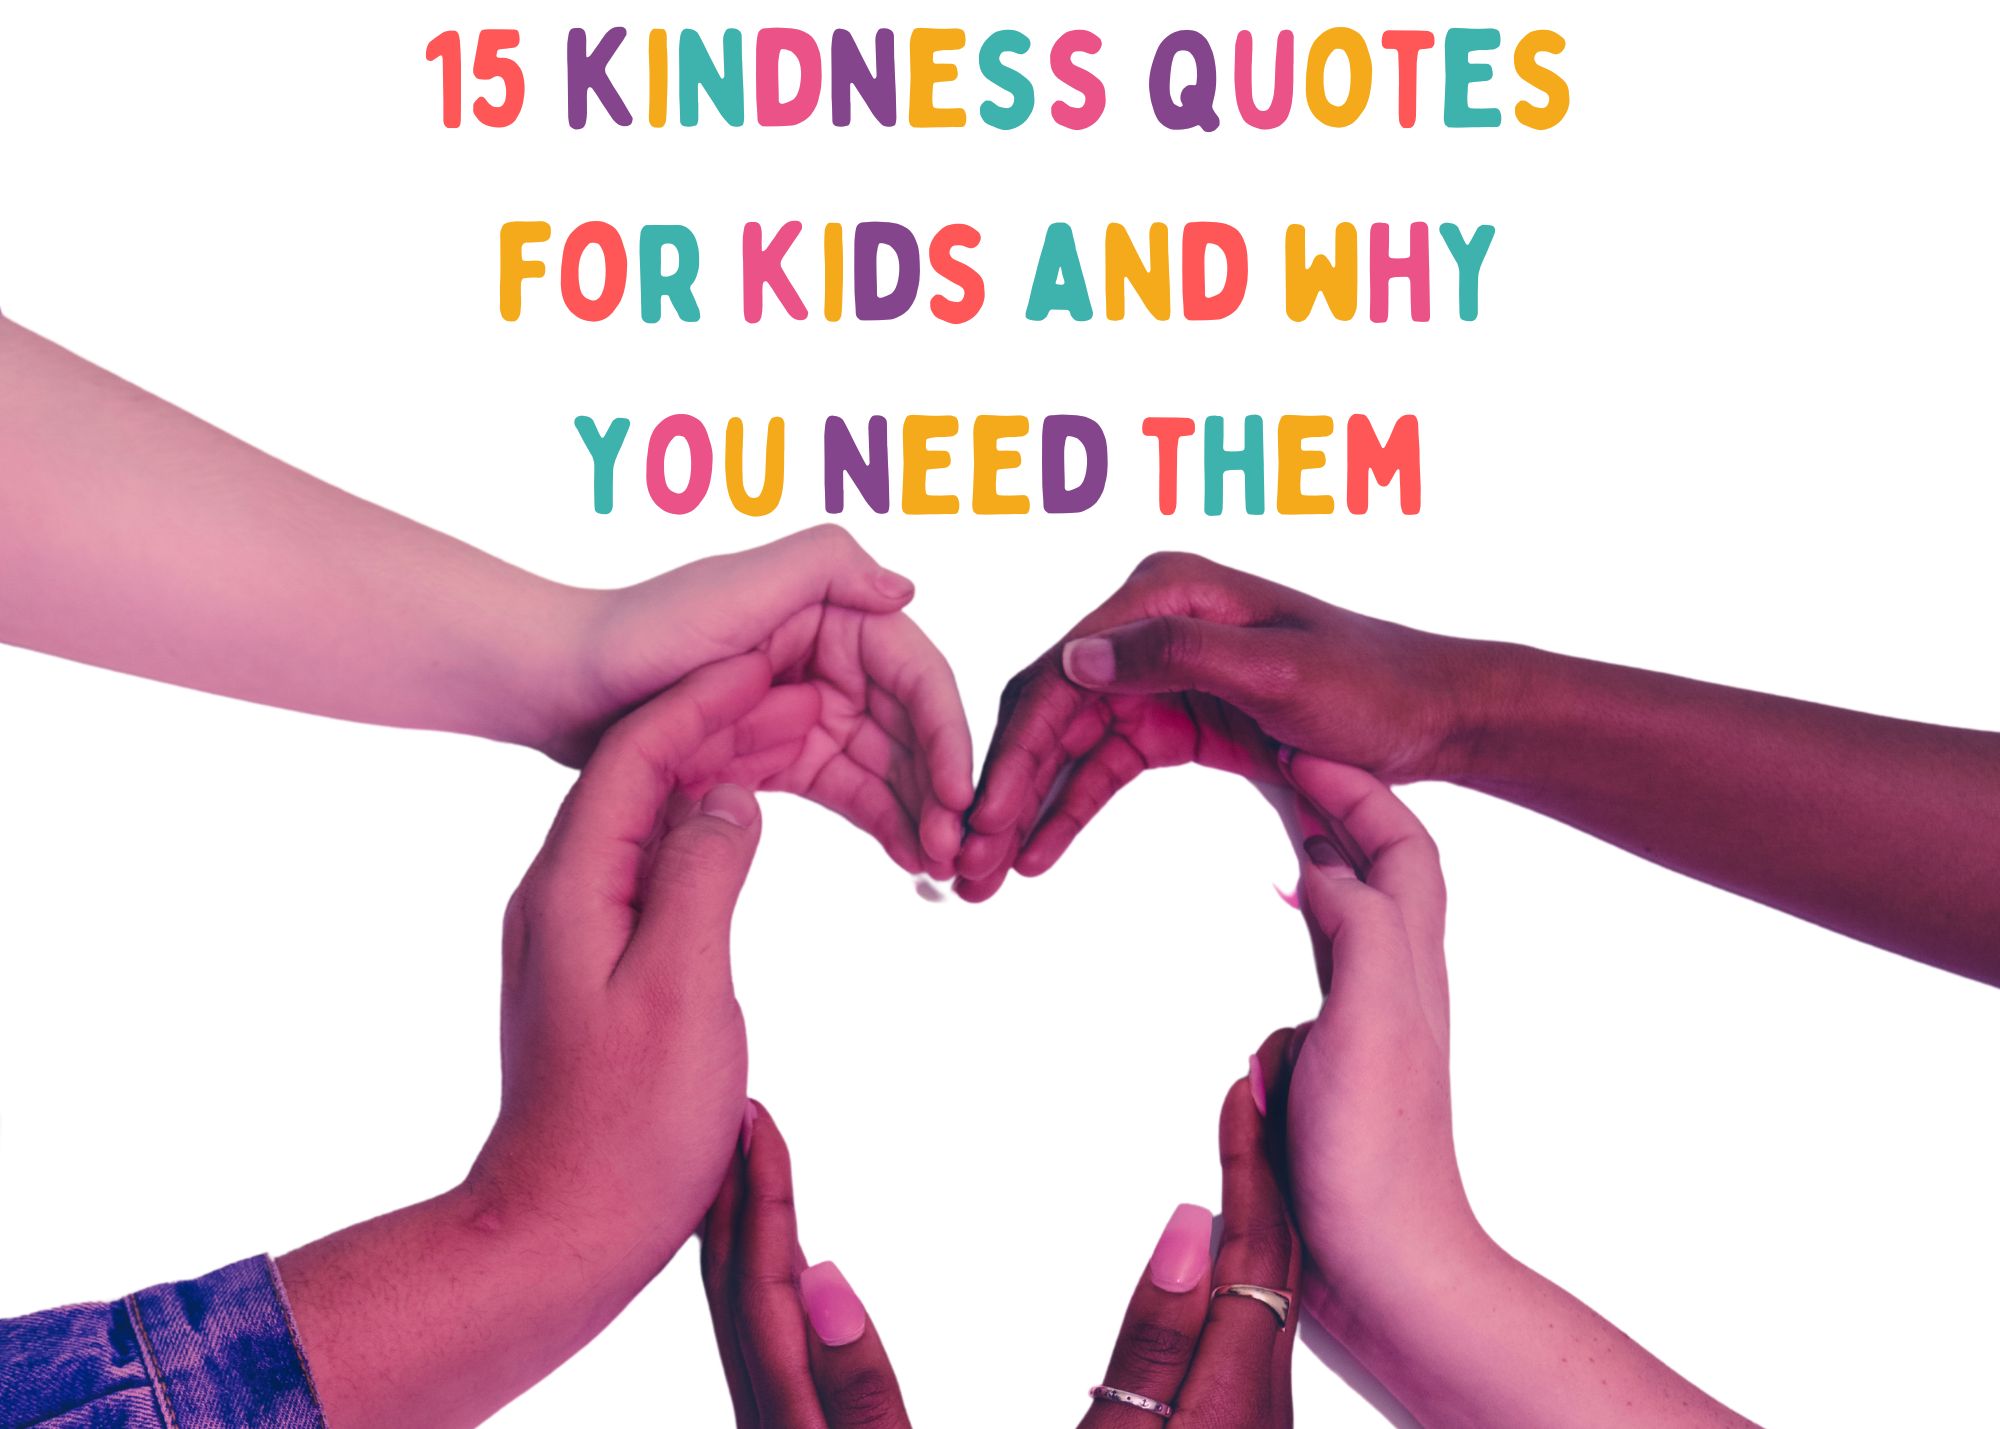 15 Kindness Quotes for Kids and Why You Need Them